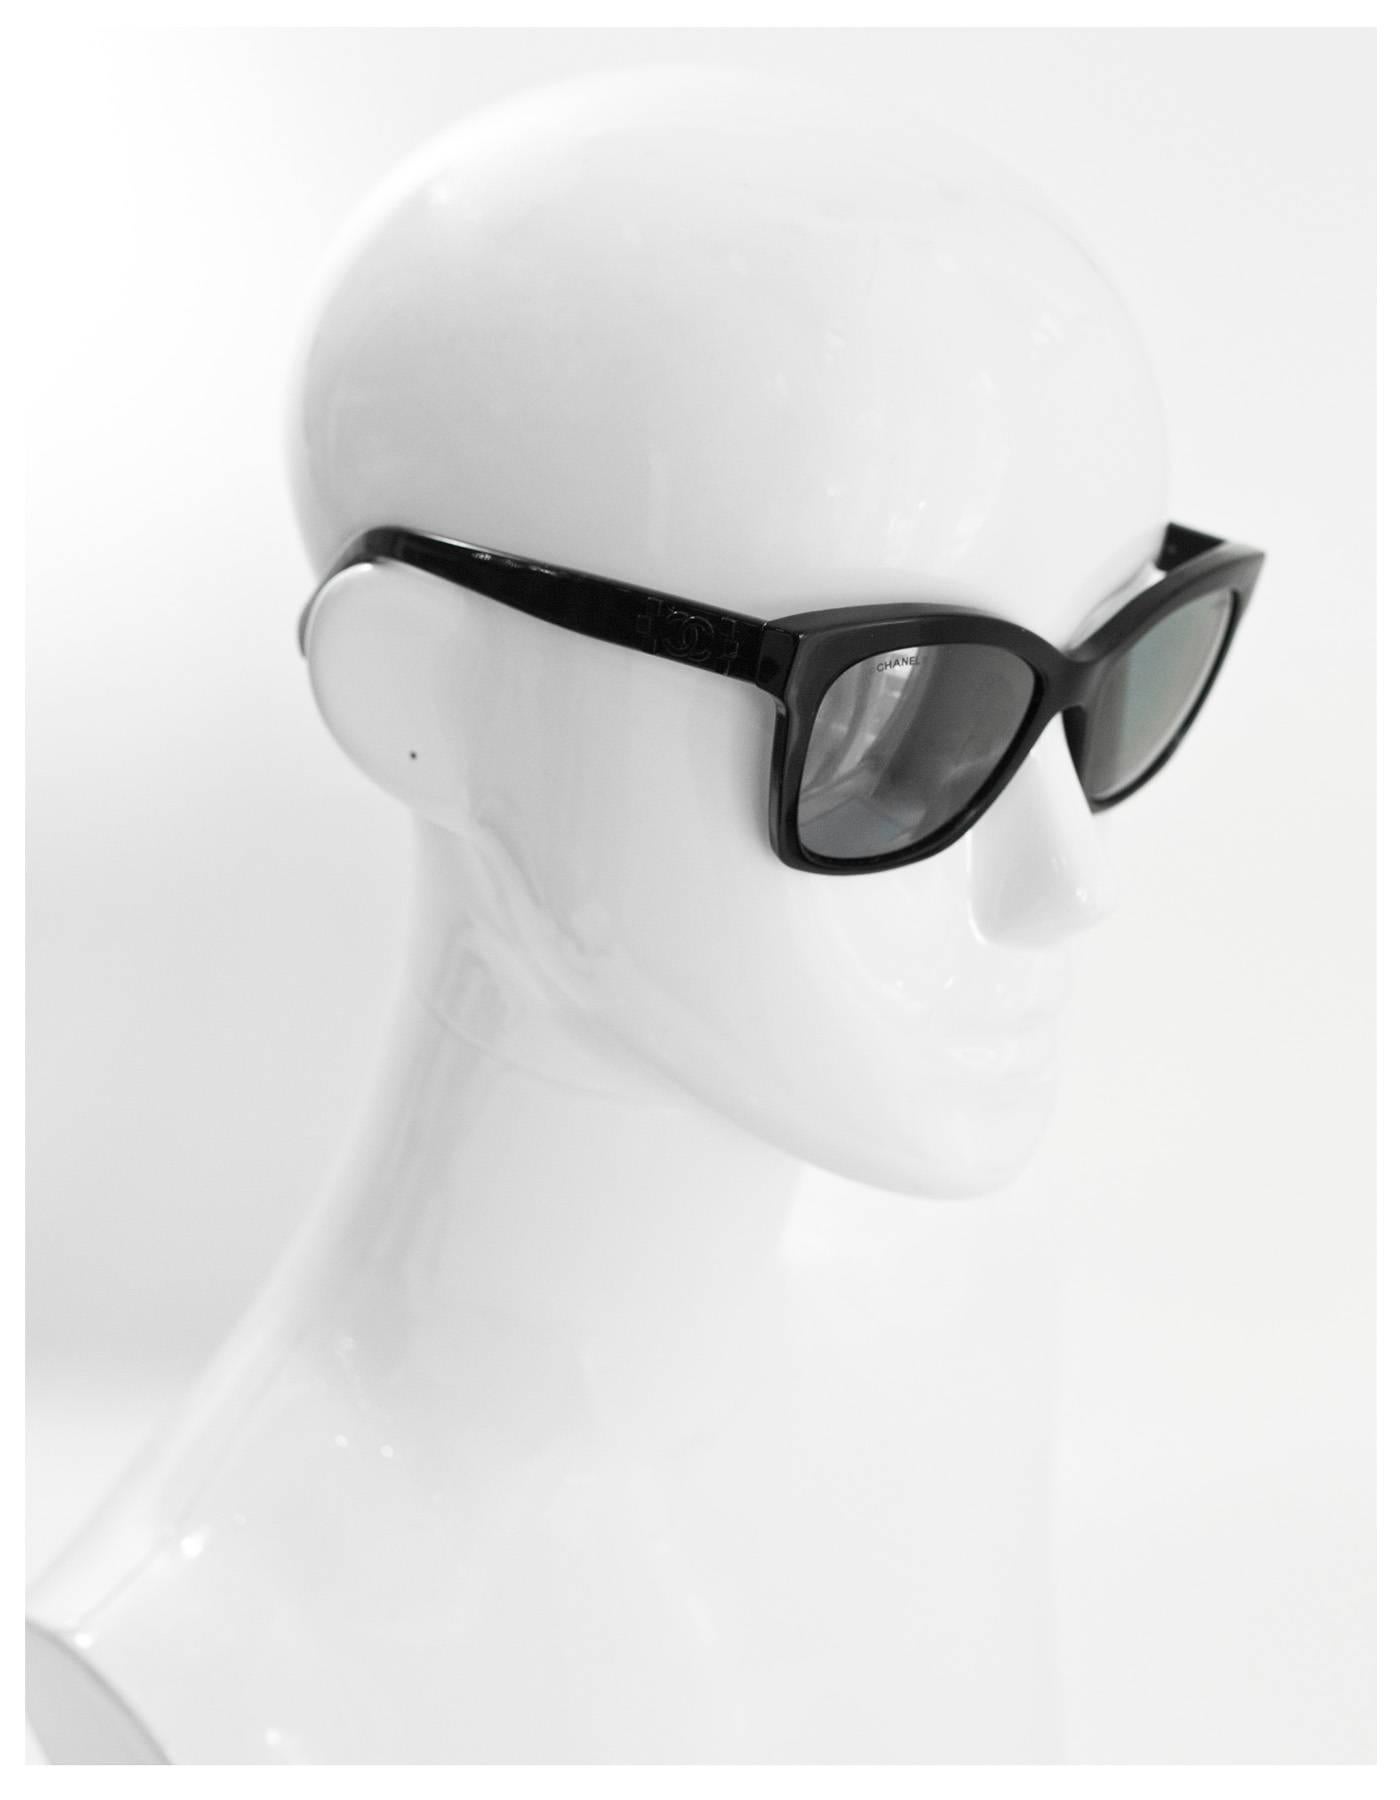 Chanel Black Pantos Spring Mirrored Sunglasses
Features boy CC logo at sides

Made In: Italy
Color: Black
Materials: Resin
Retail Price: $350 + tax
Overall Condition: Excellent pre-owned condition, minor surface marks
Includes: Chanel sunglasses